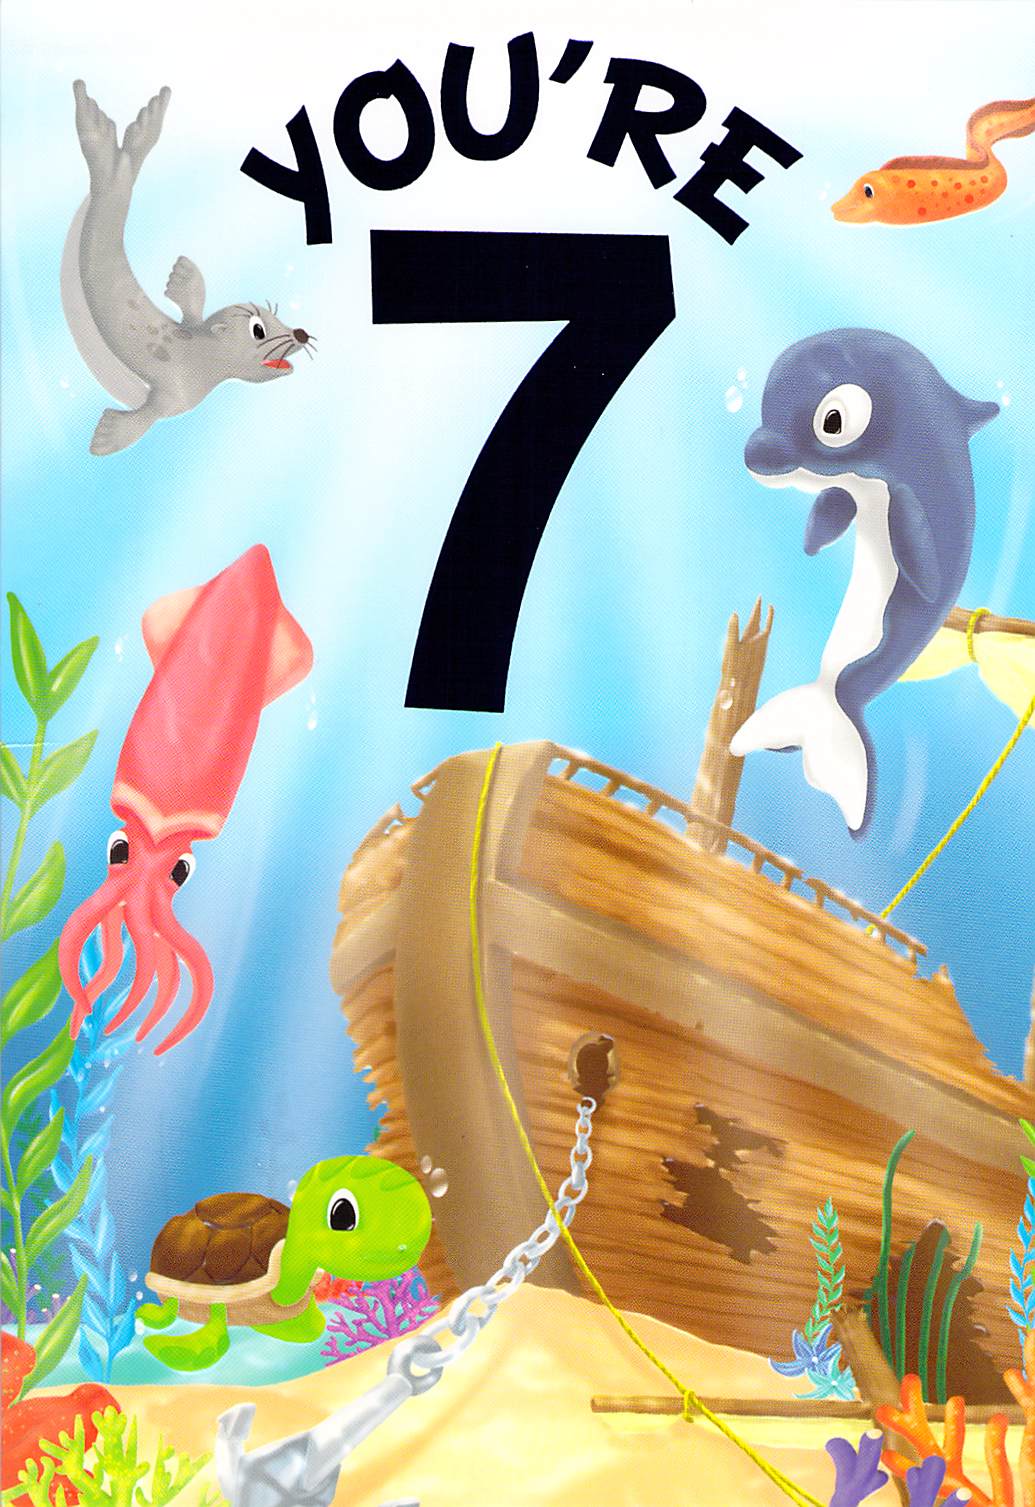 7th Birthday - Age 7 - Under The Sea - Greeting Card -Multi Buy Discount - Free P&P